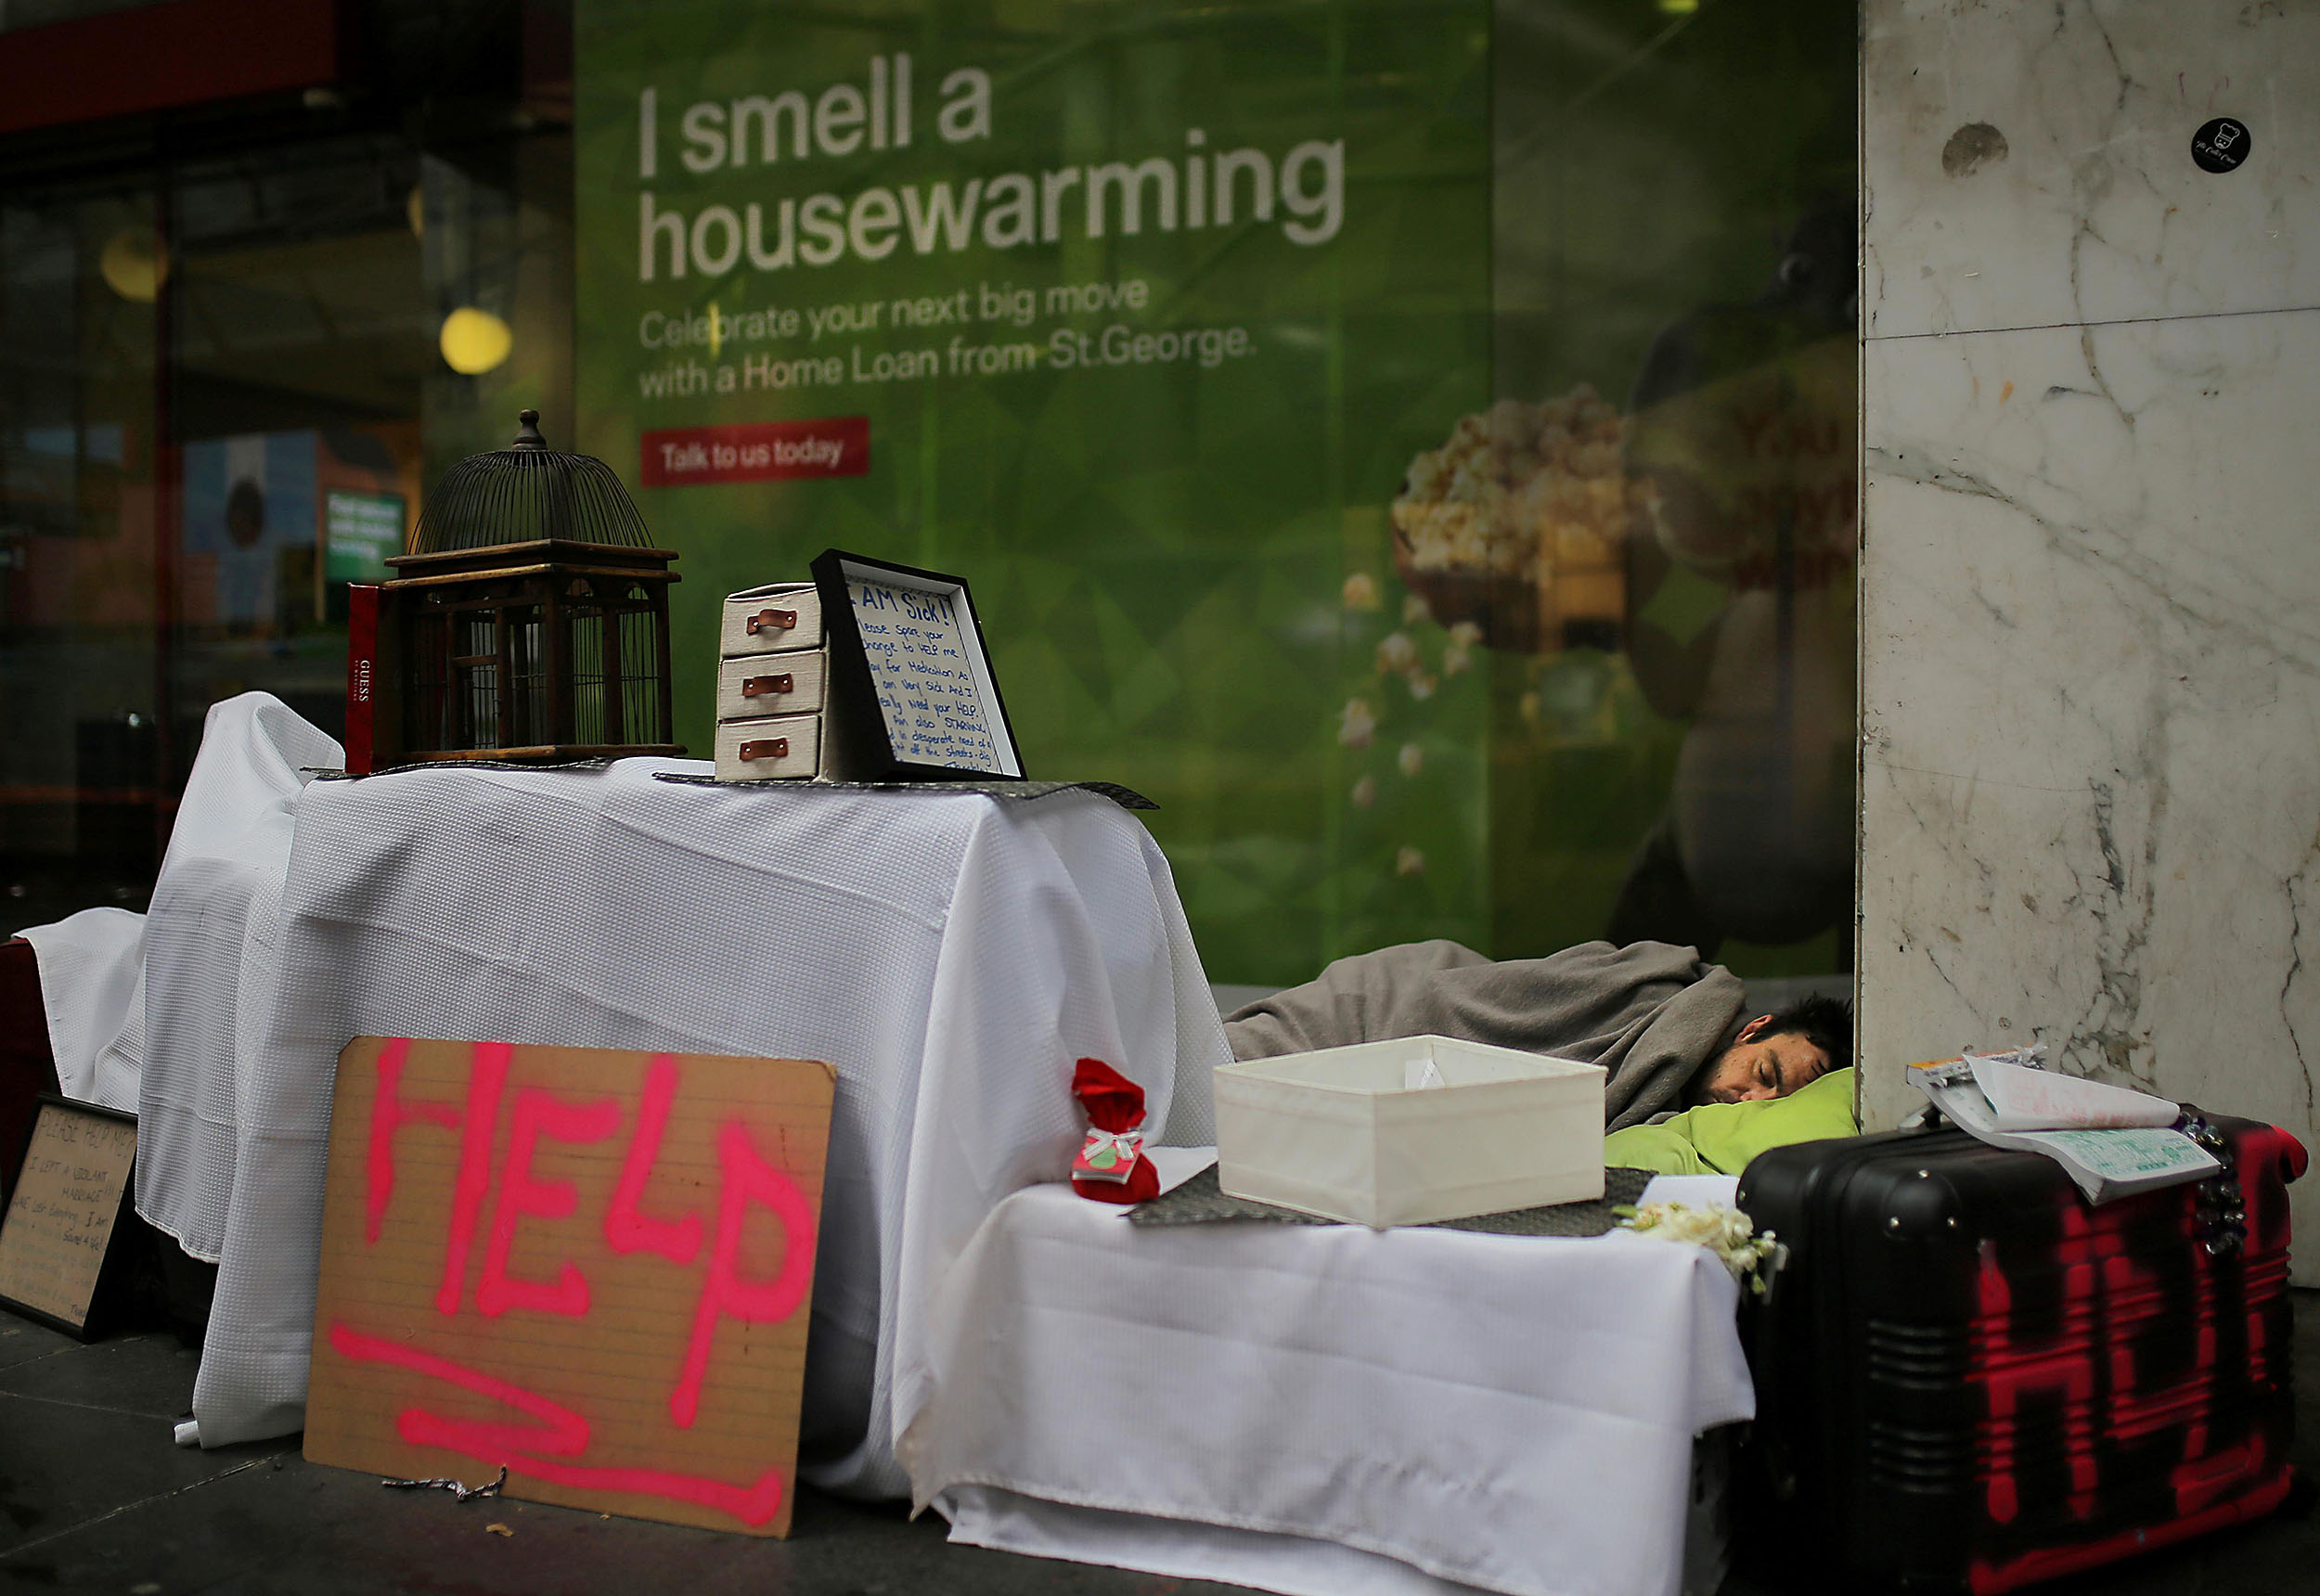  A homeless man sleeps in a makeshift encampment in front of a bank displaying a home loan advertisement in central Sydney, Australia, July 31, 2017. 